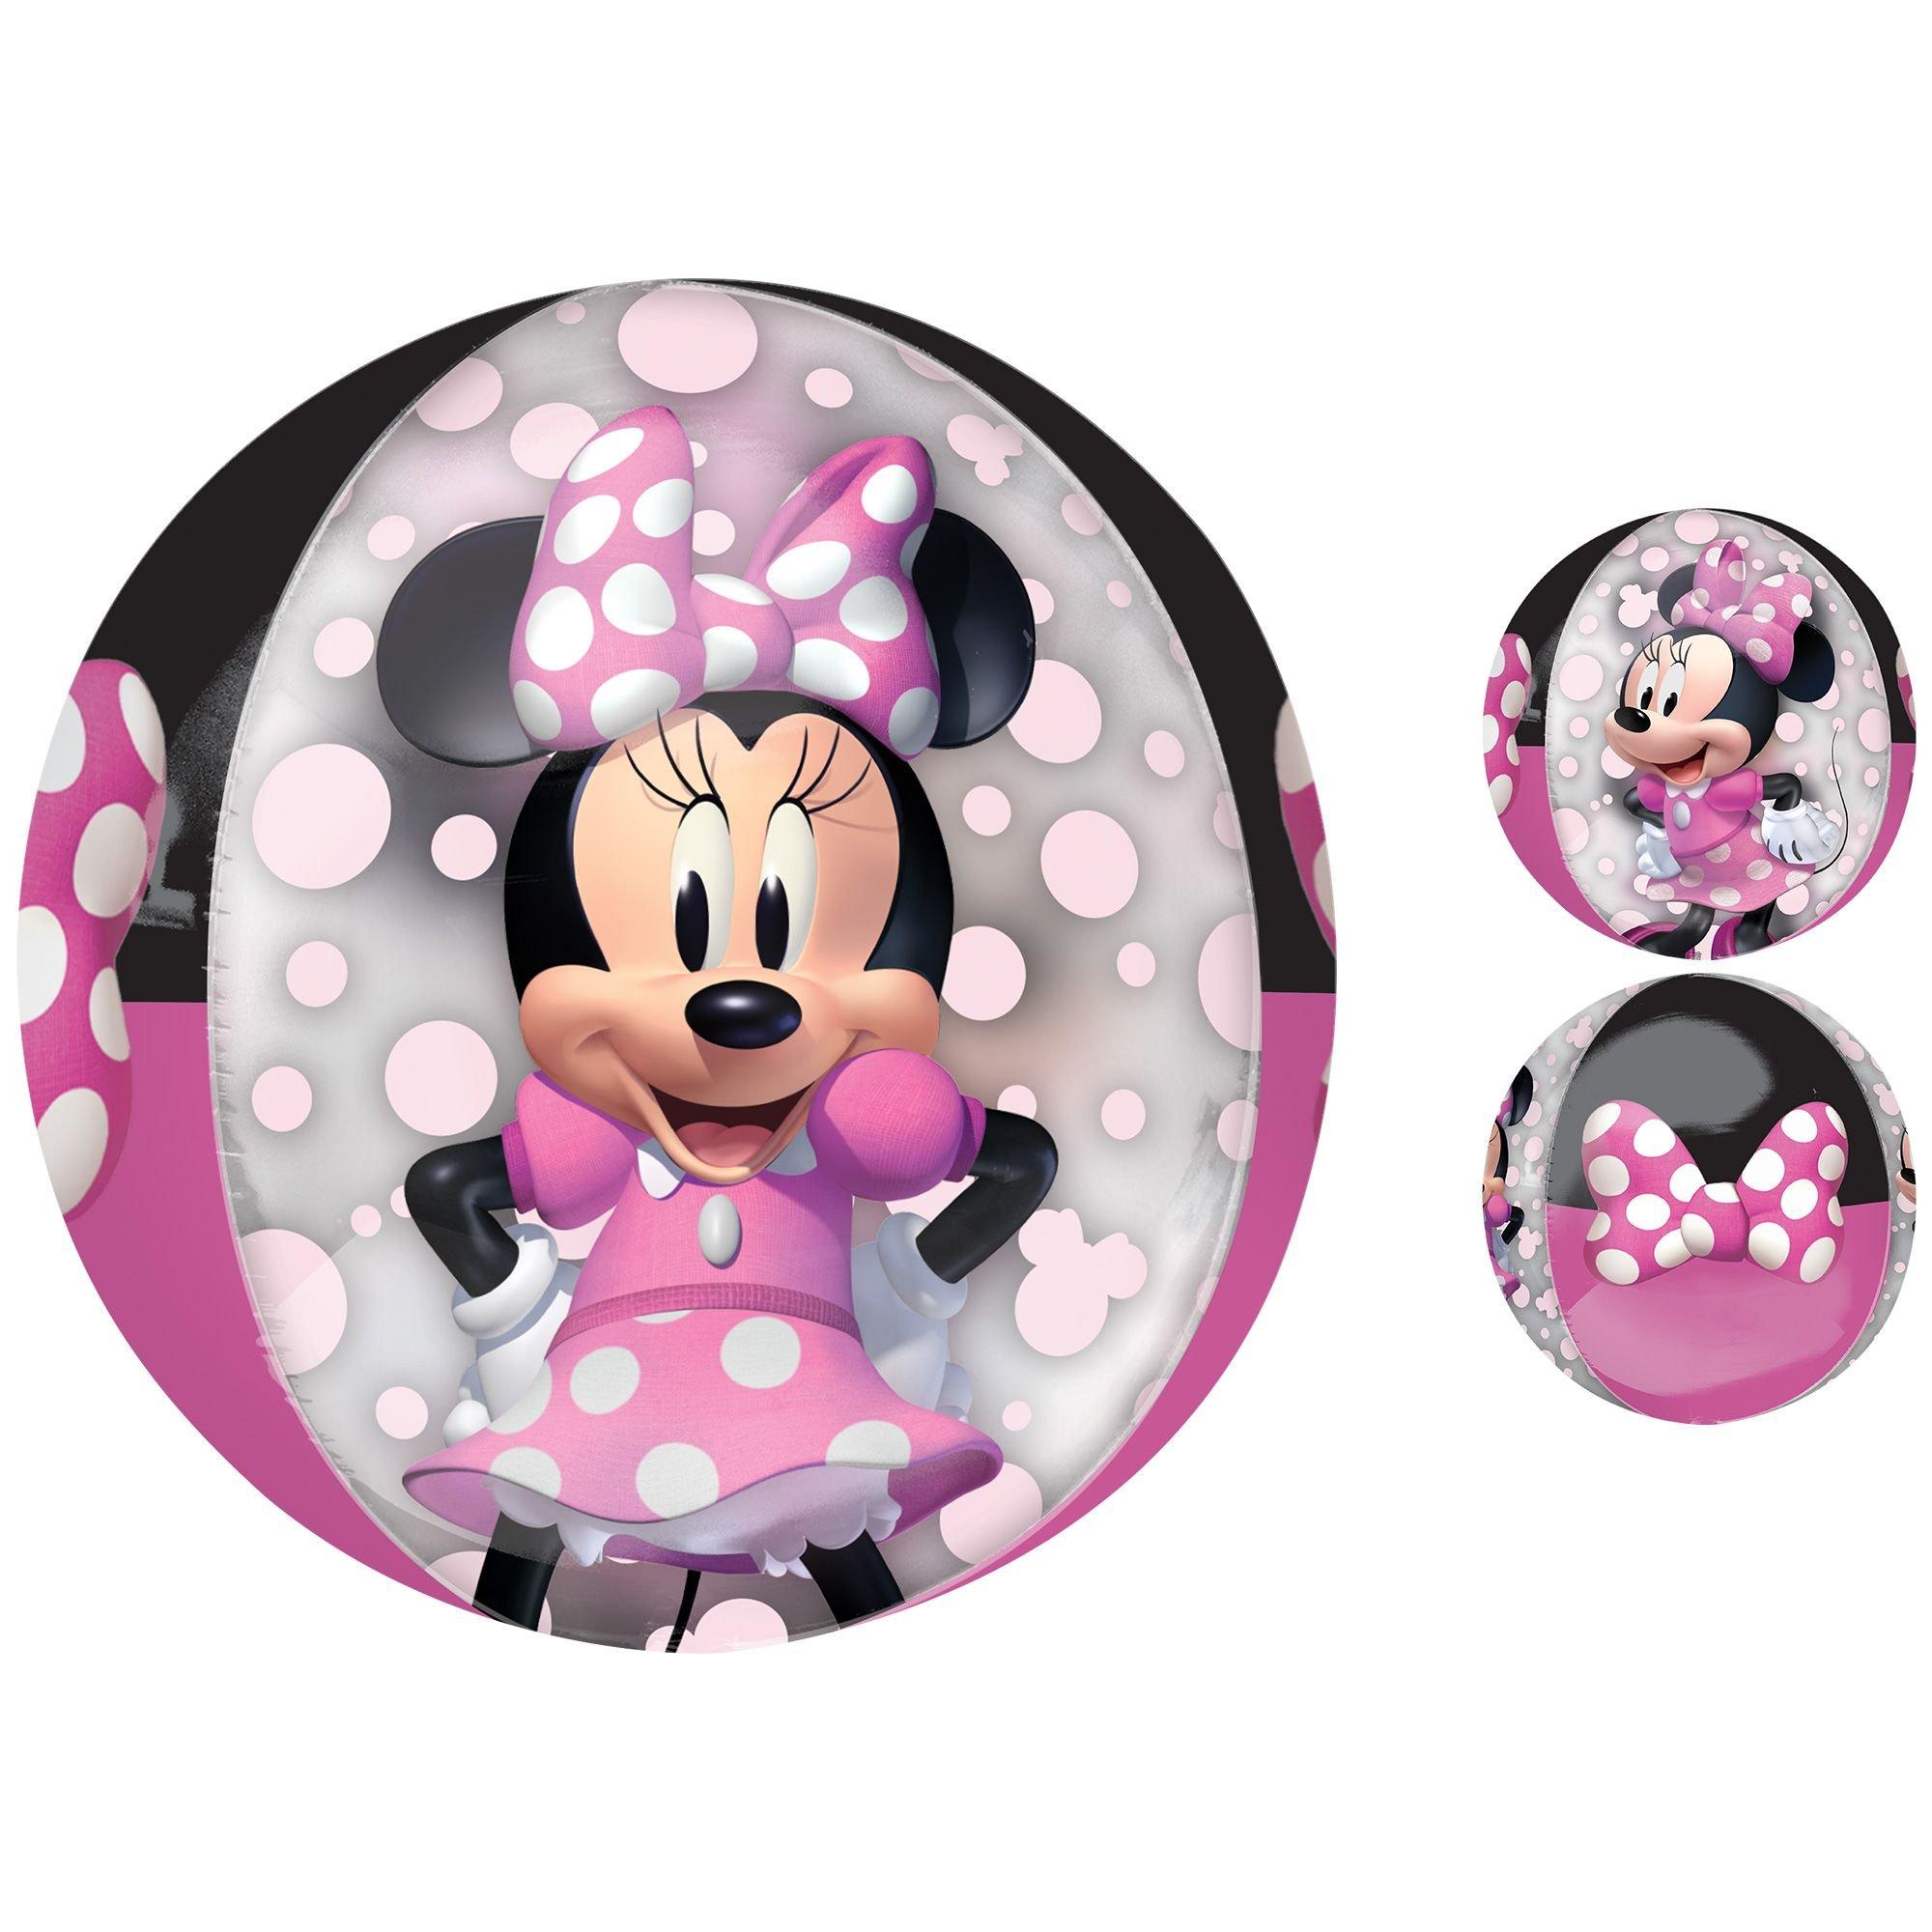 Minnie Mouse Forever Balloon, 16.5in